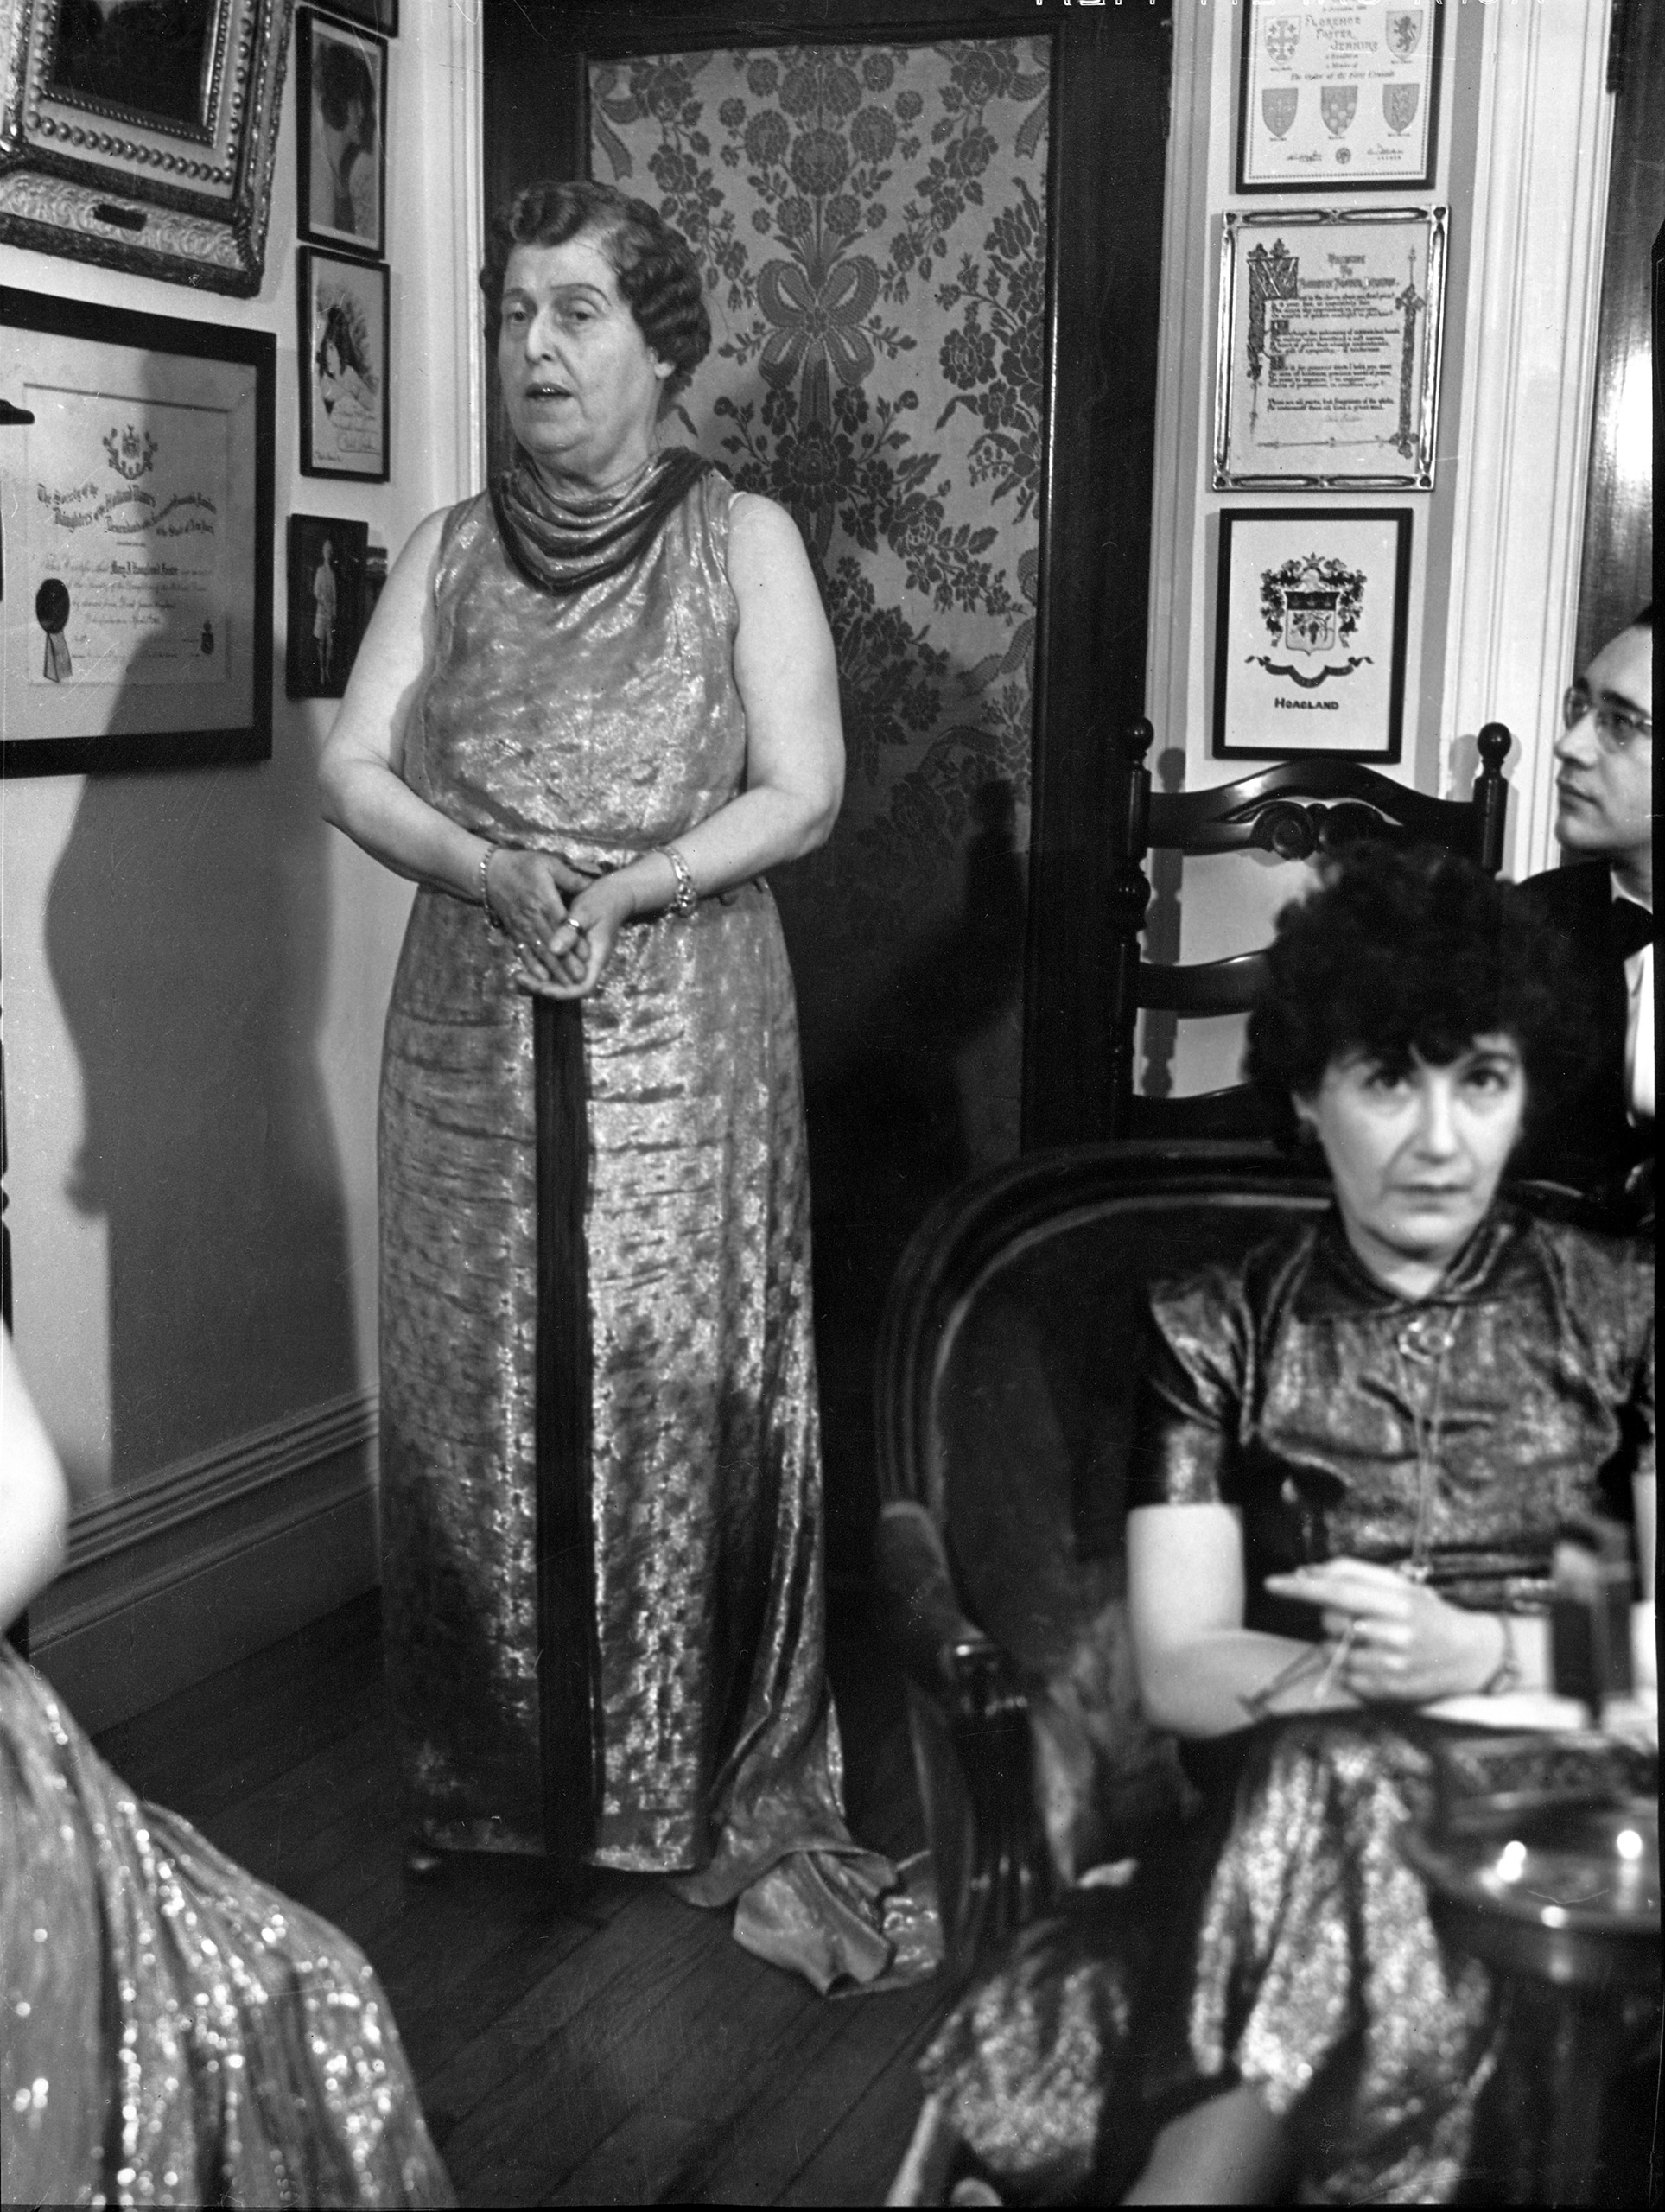 Florence Foster Jenkins (L) entertaining her socialite guests at a formal party in her home in 1937. (Margaret Bourke-White—The LIFE Picture Collection/Getty Images)